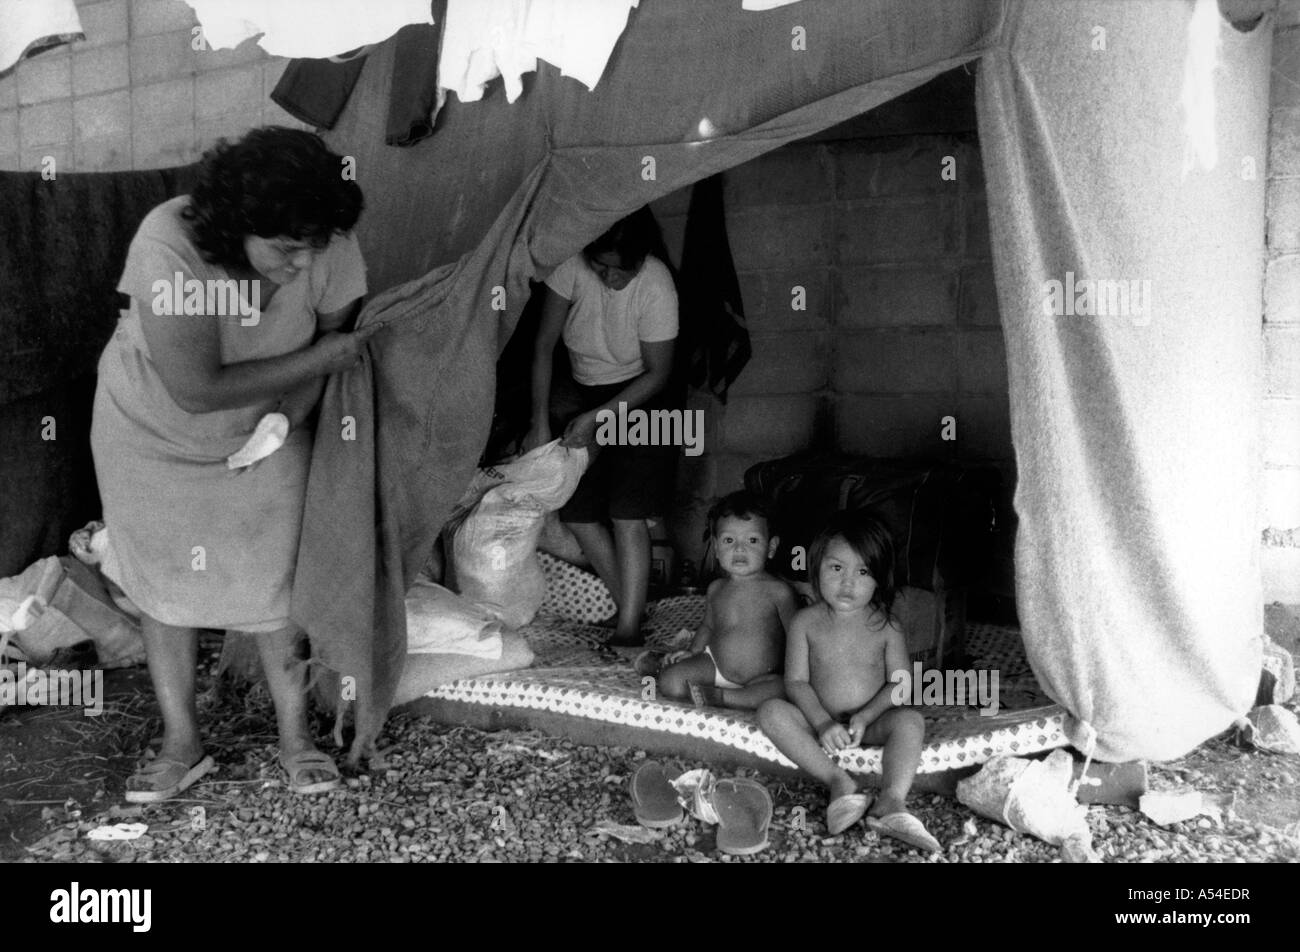 Painet hn1987 622 black and white hurricane mitch this family lost home all possesions catastrophic flooding san pedro sula Stock Photo